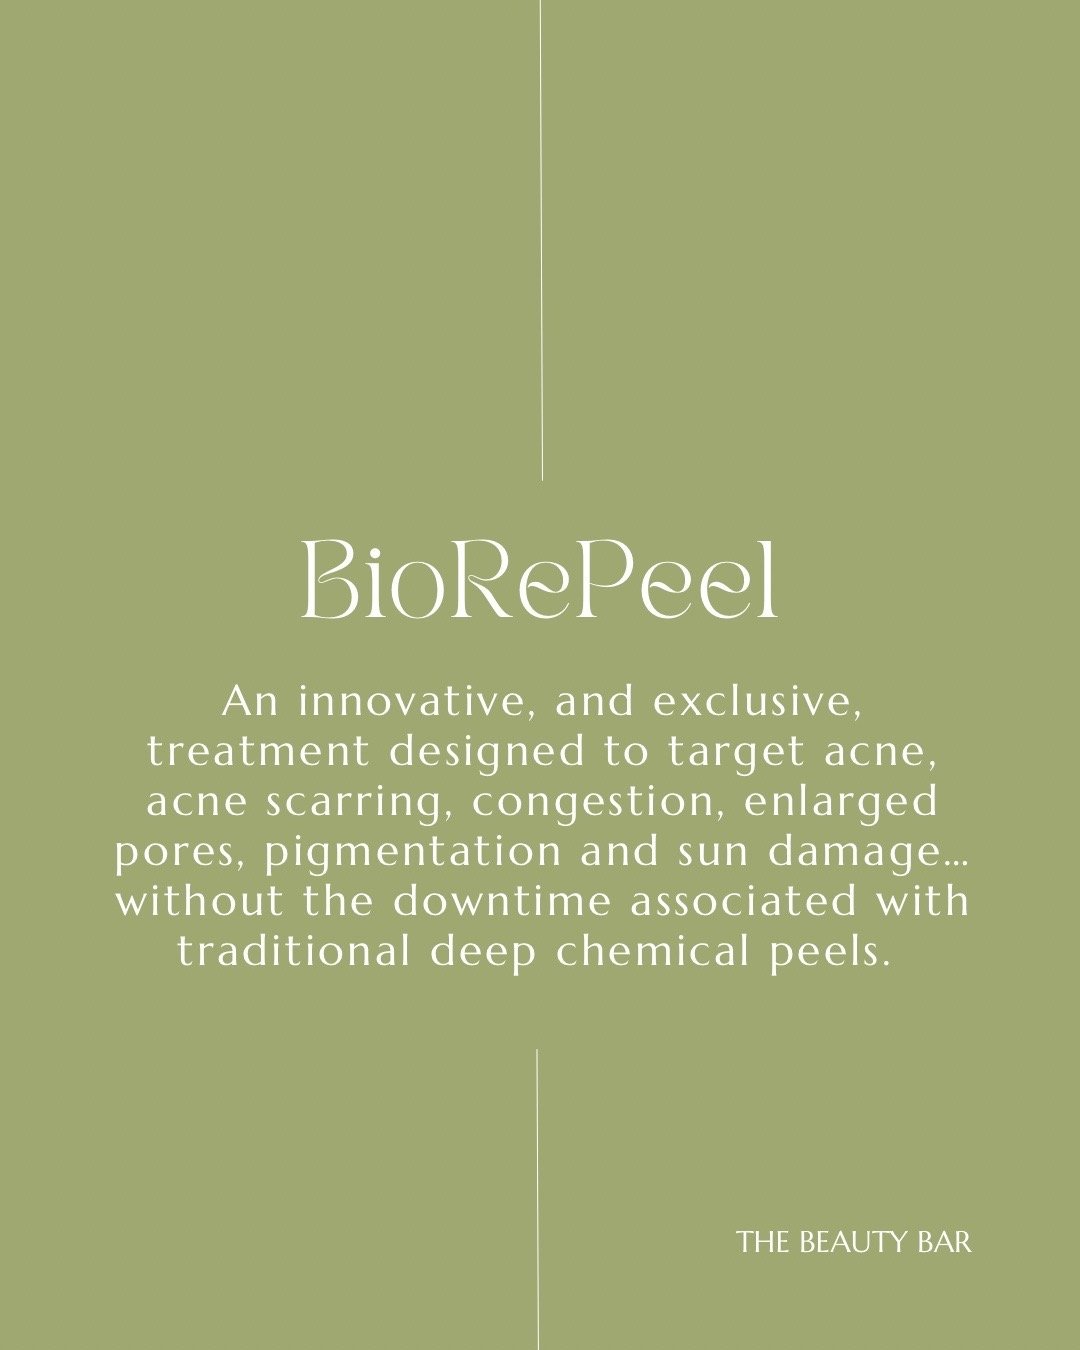 When the calendar has a BioRePeel scheduled&hellip; you know it&rsquo;s going to be a good day!

BioRePeel&rsquo;s are a treatment designed to target acne, acne scarring, congestion, enlarged pores, pigmentation and sun damage. It&rsquo;s no secret t